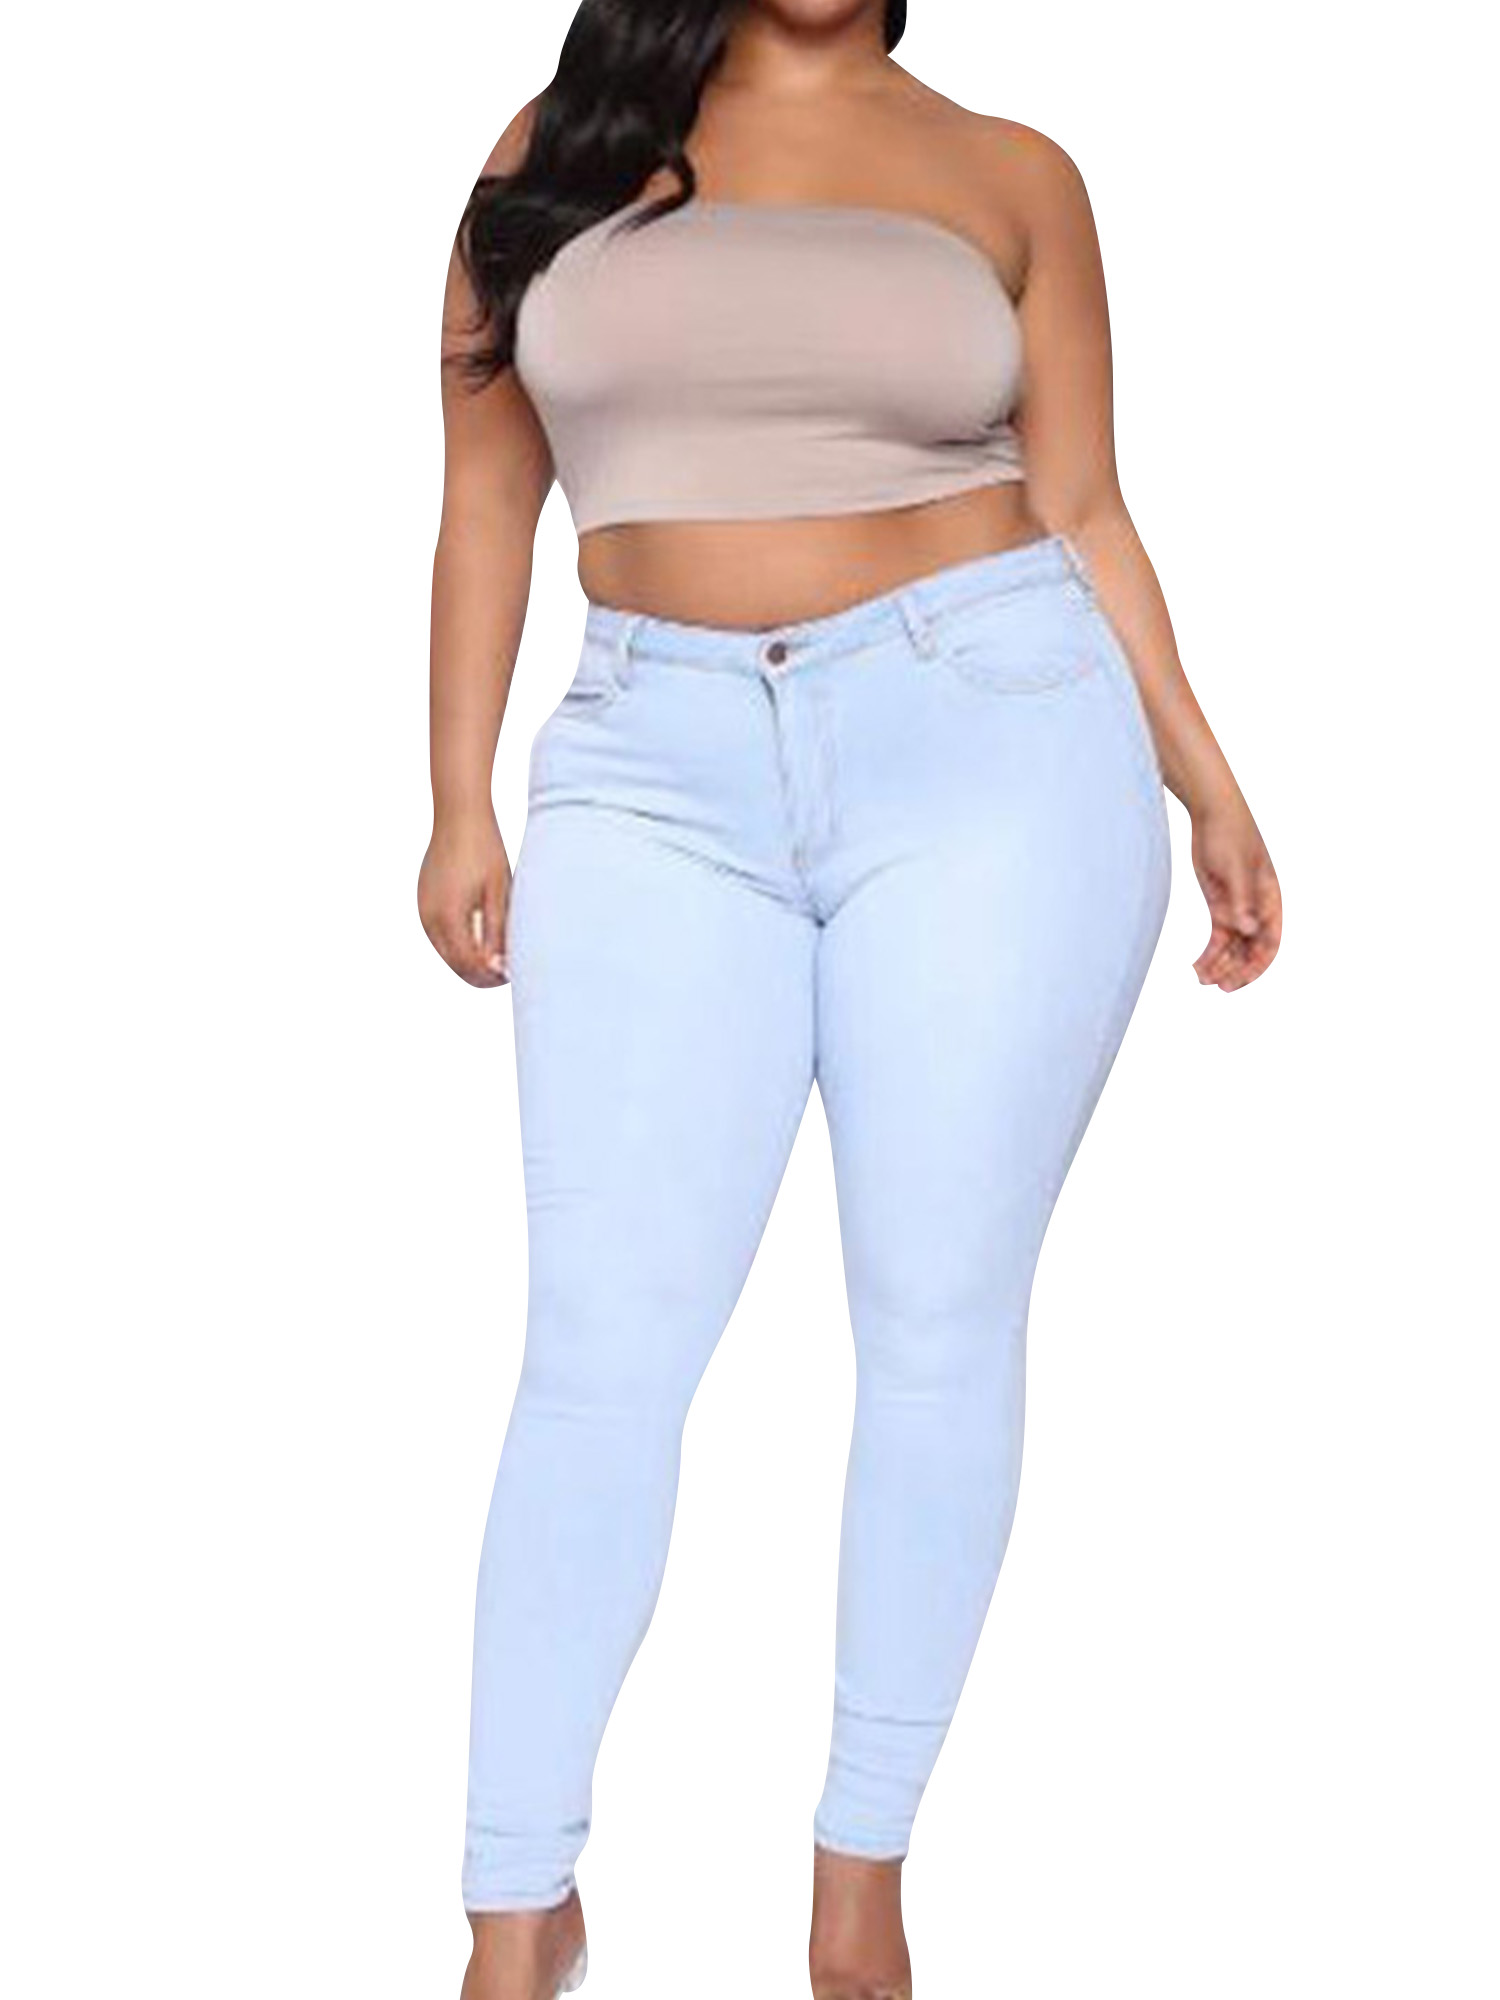 Women High Rise Distressed Solid Stretch Sexy Skinny Leg Denim Jeans Bodycon Jeggings Pencil Pants Trousers With Pockets - image 1 of 5